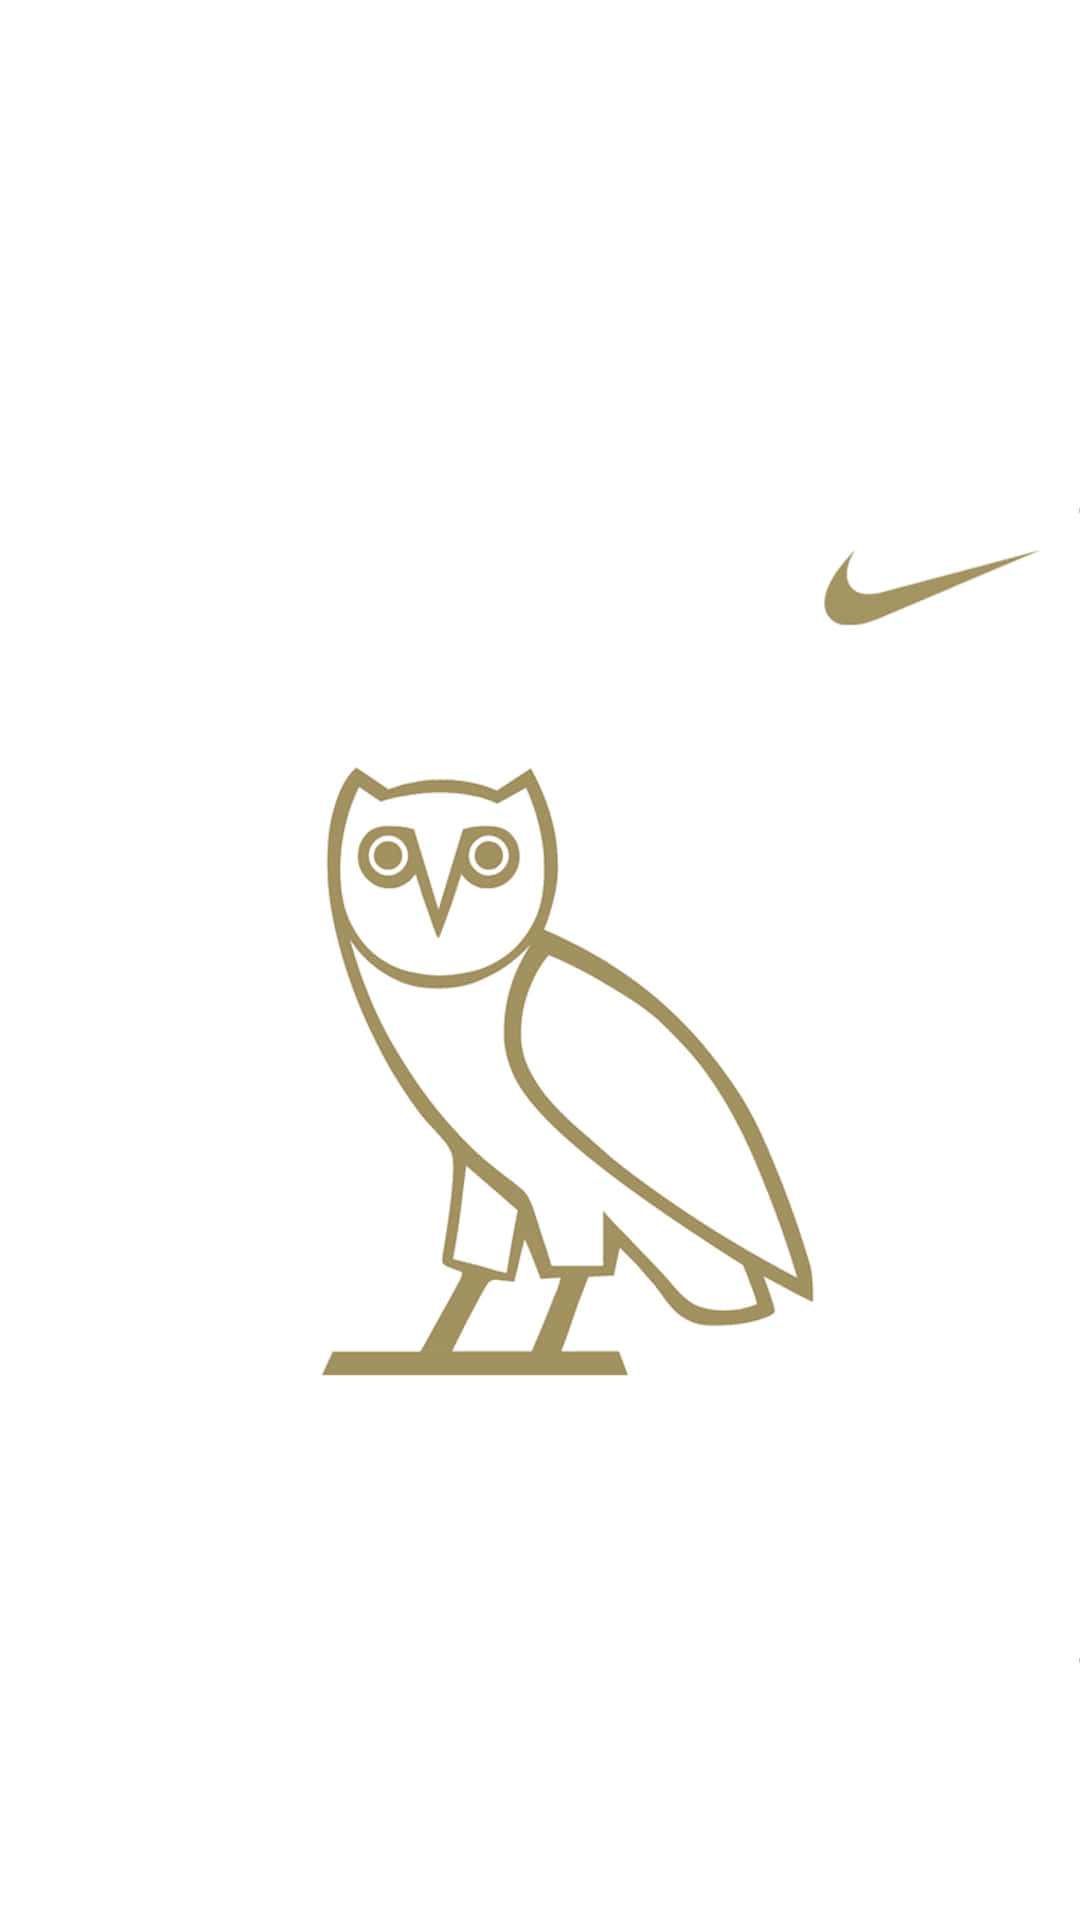 OVOXO's signature O: a symbol of unity, loyalty, and community. Wallpaper